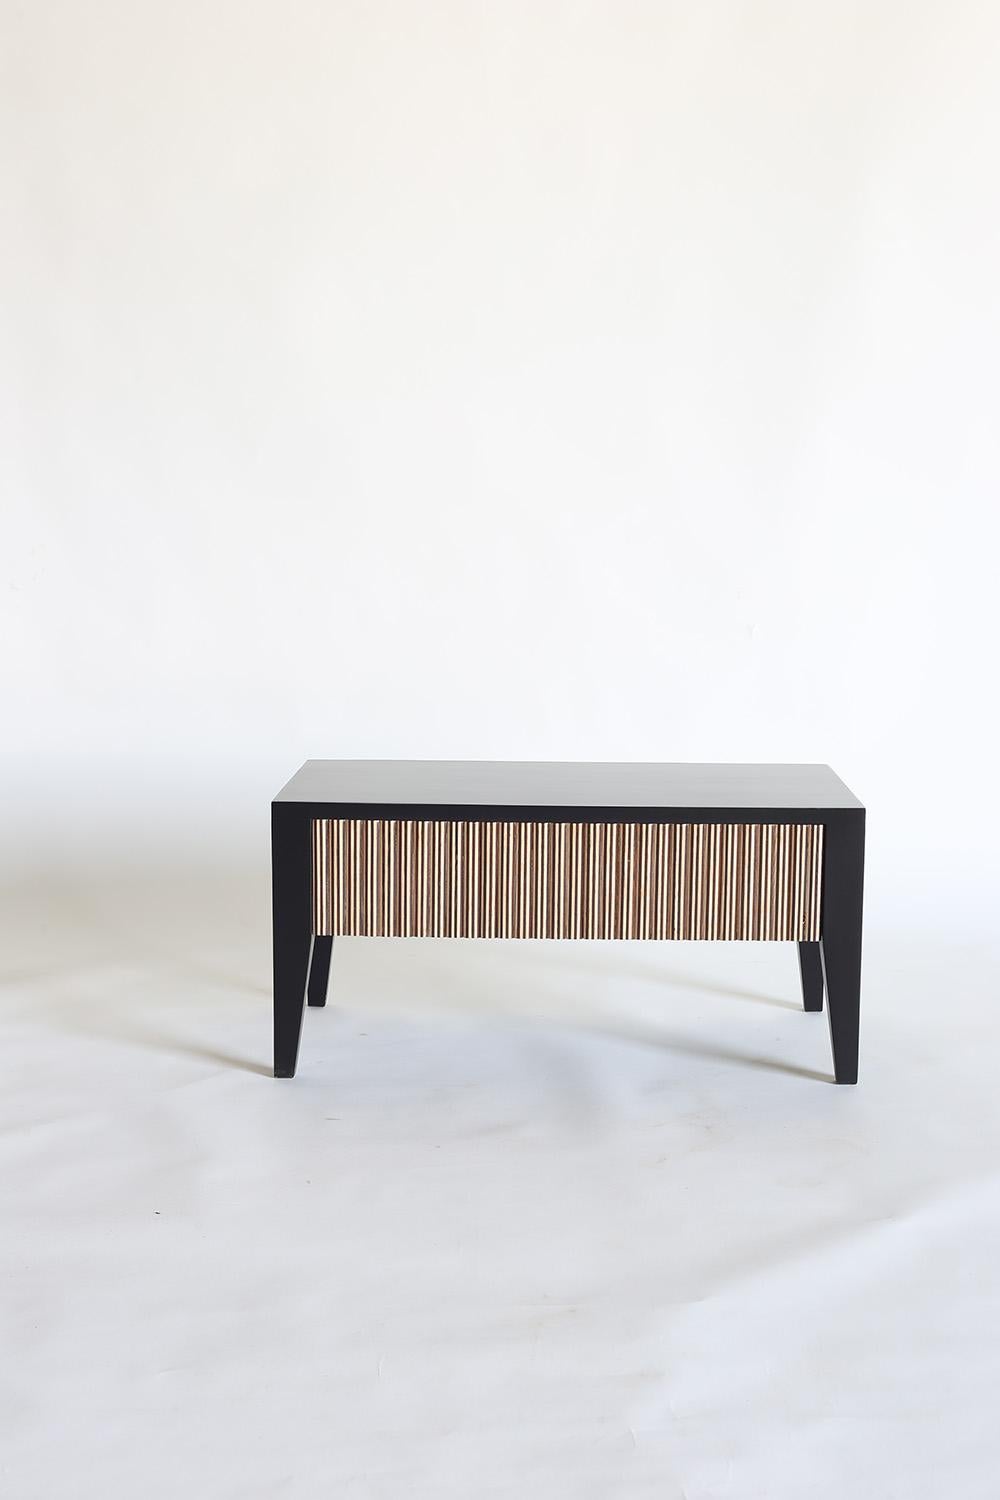 Bringing an air of calm and artistic beauty into the home, the Saral Side Table is an exquisitely handcrafted piece. Using white oak, it features delicate inlaid woodwork that forms a repeating pattern across each facade. The subtle styling of the